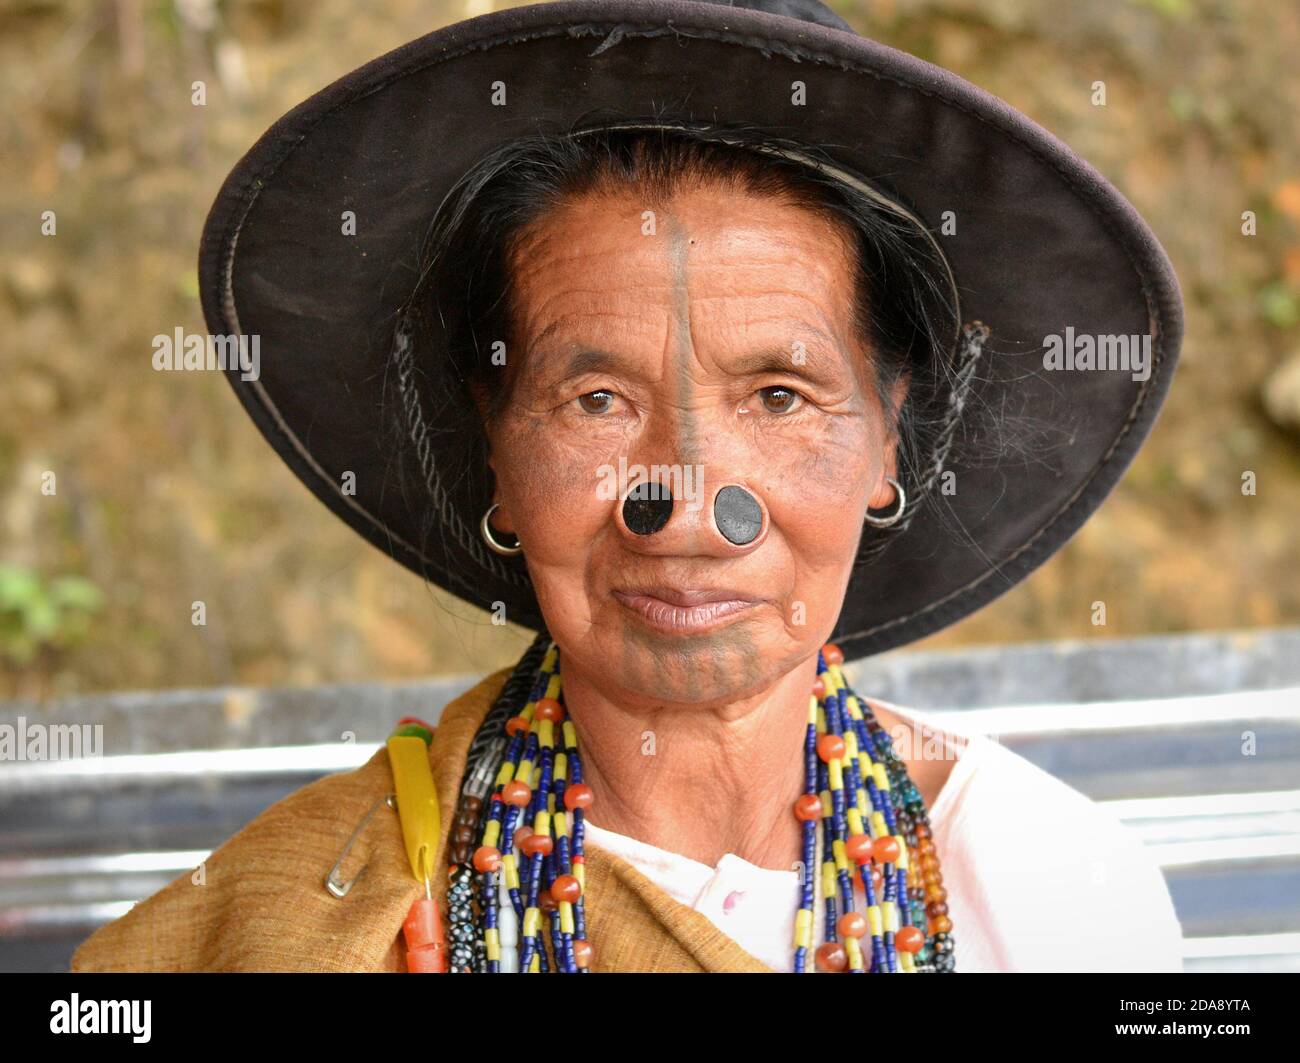 Elderly Northeast Indian Apatani tribal woman with black nose plugs and traditional face tattoos wears a modern sun hat and poses for the camera. Stock Photo